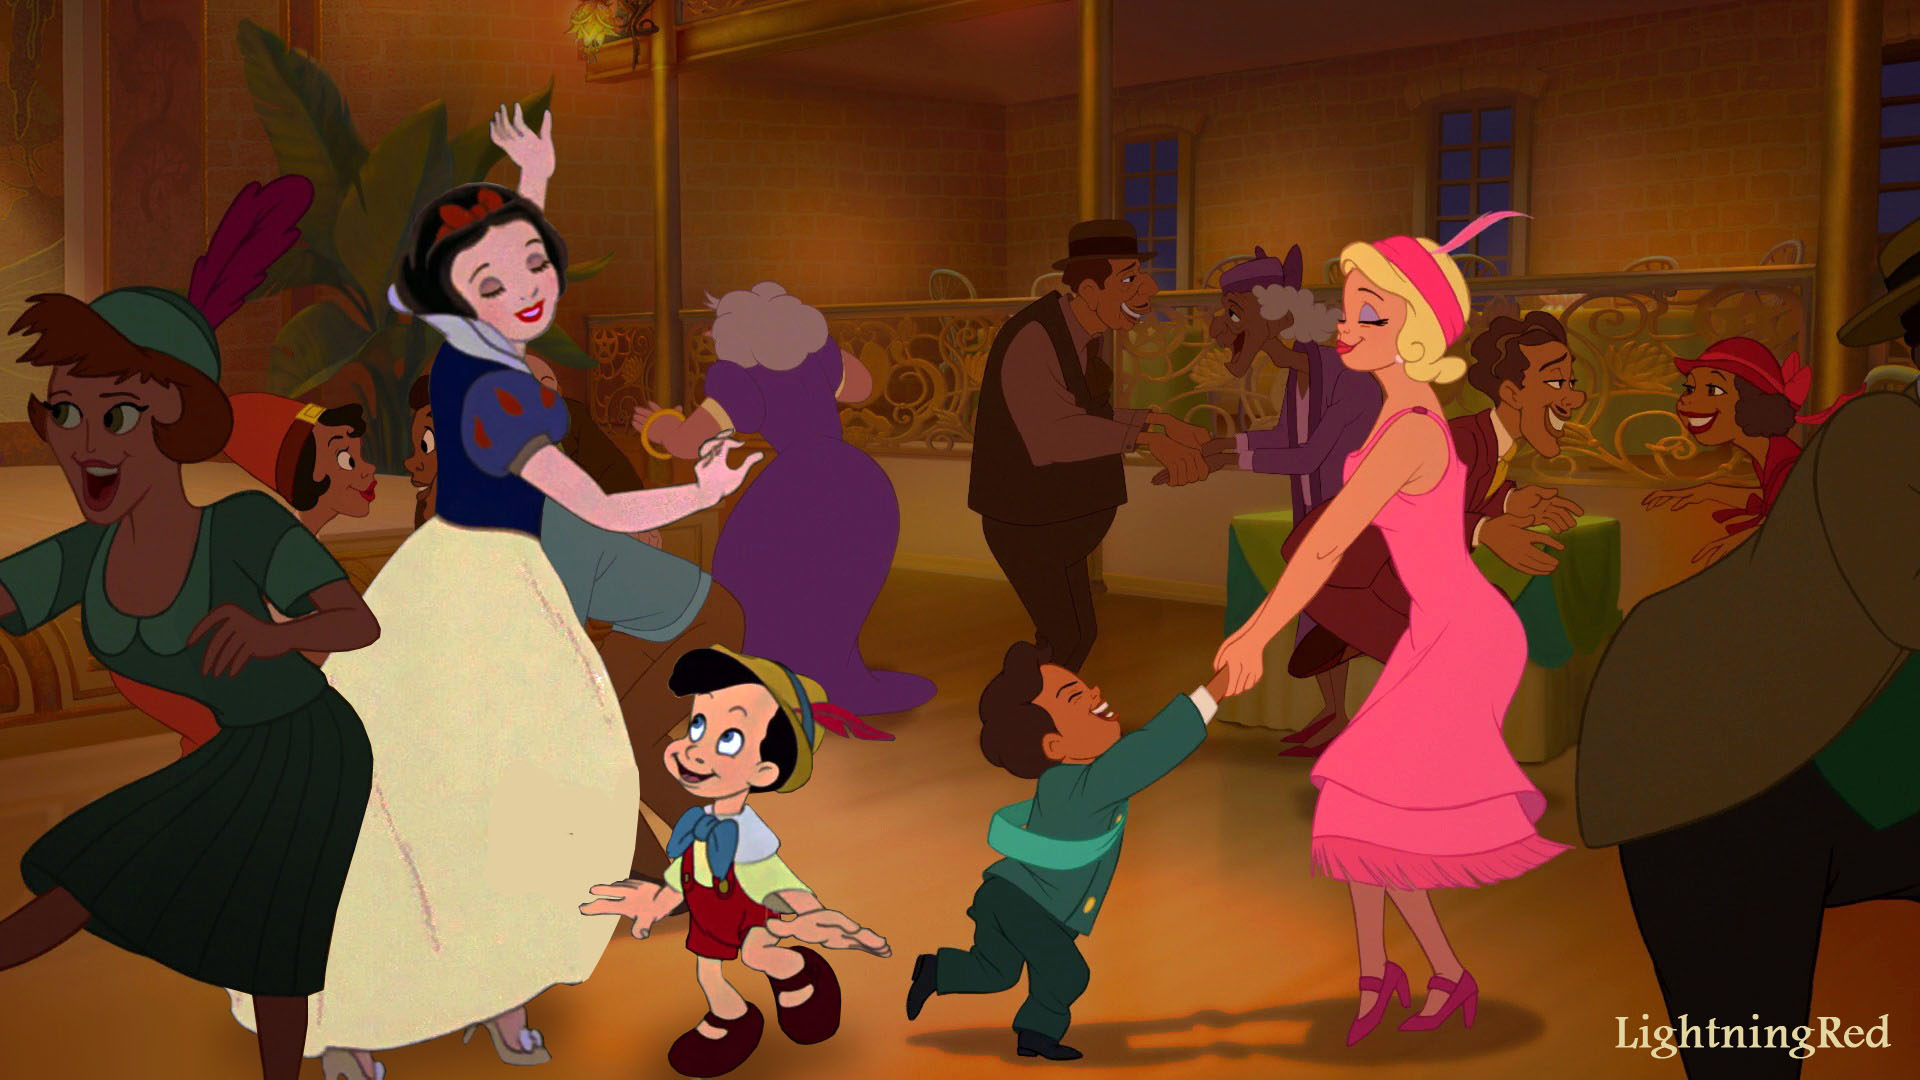 Snow White and Pinocchio dancing in Tiana's Palace